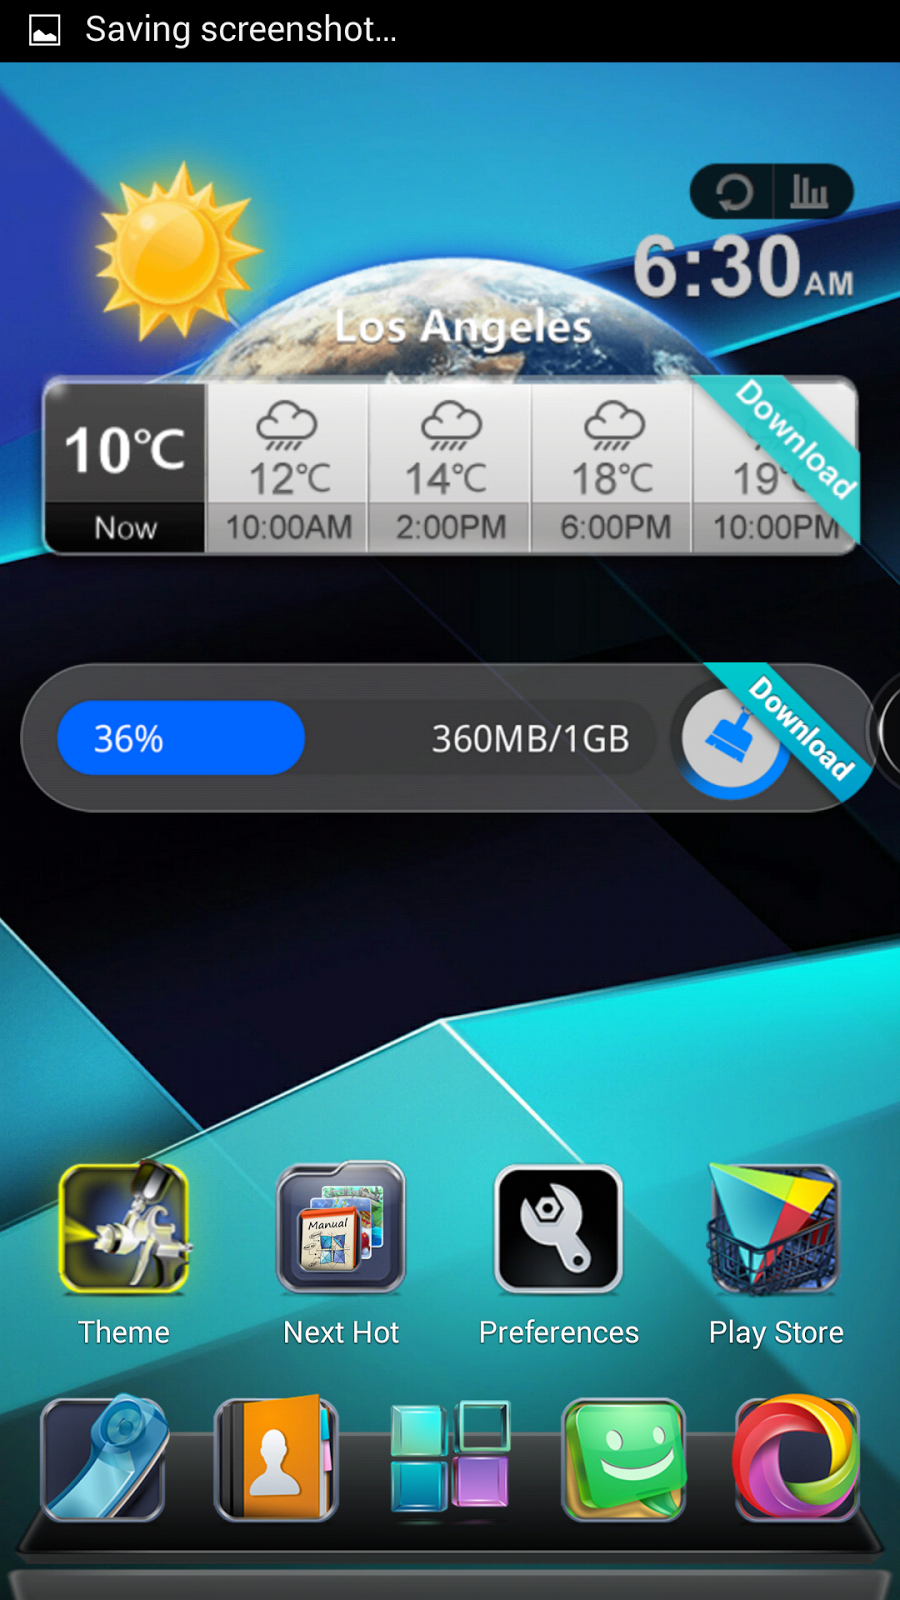 Next Launcher 3D Shell Apk Free Download For Android Latest v3.7.3.2